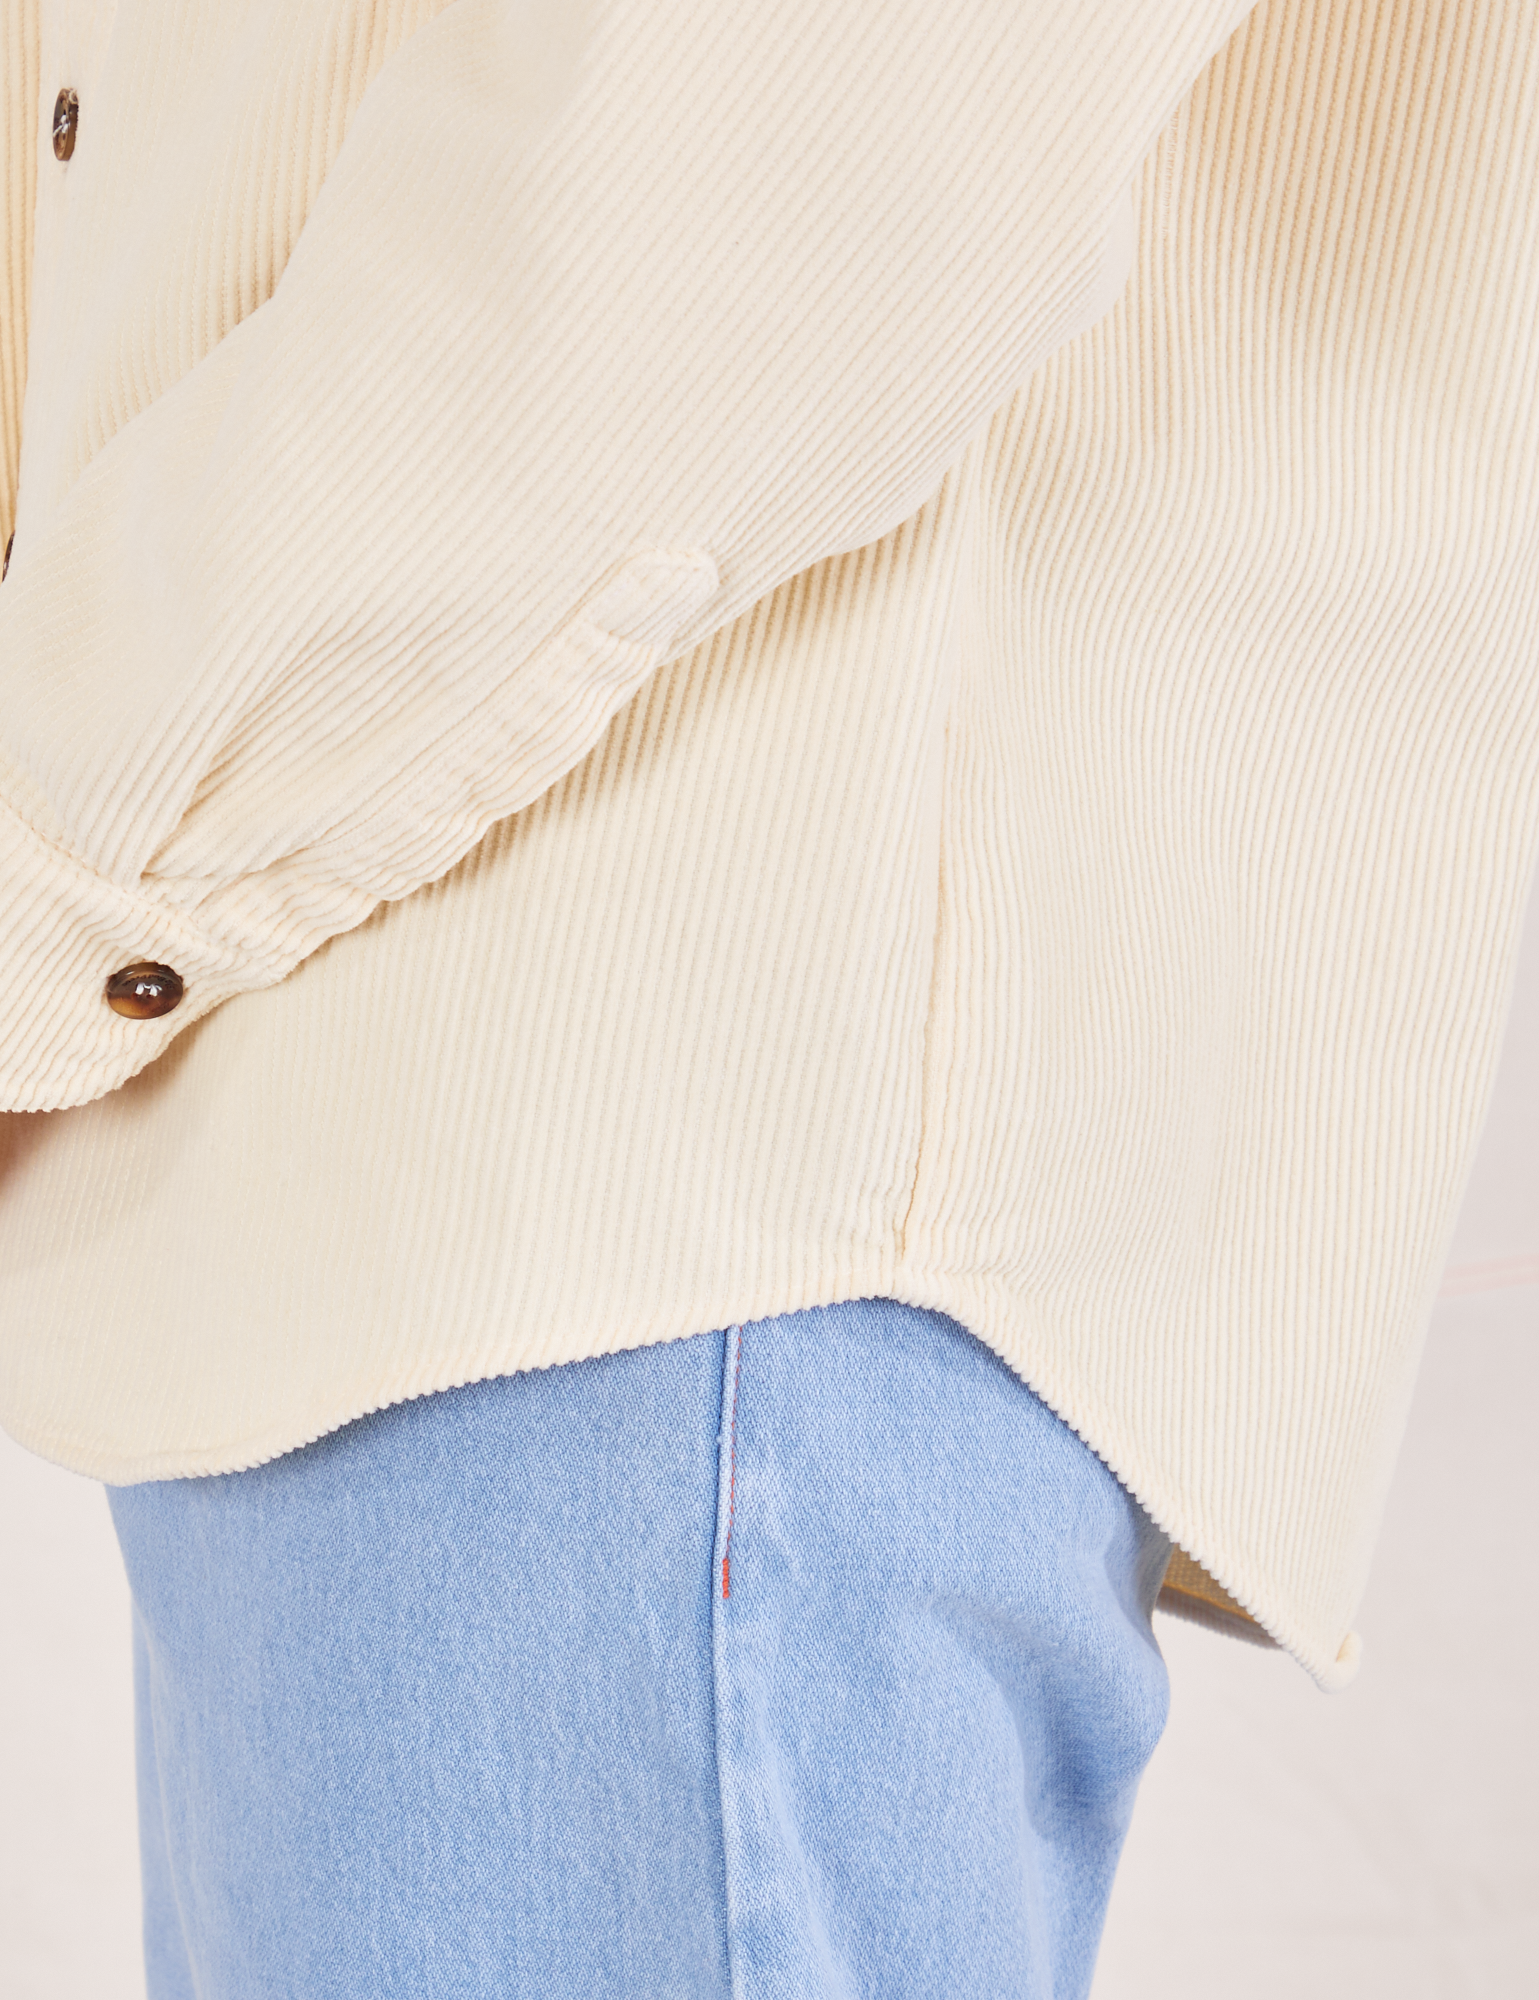 Corduroy Overshirt in Vintage Off-White side close up of curved hem